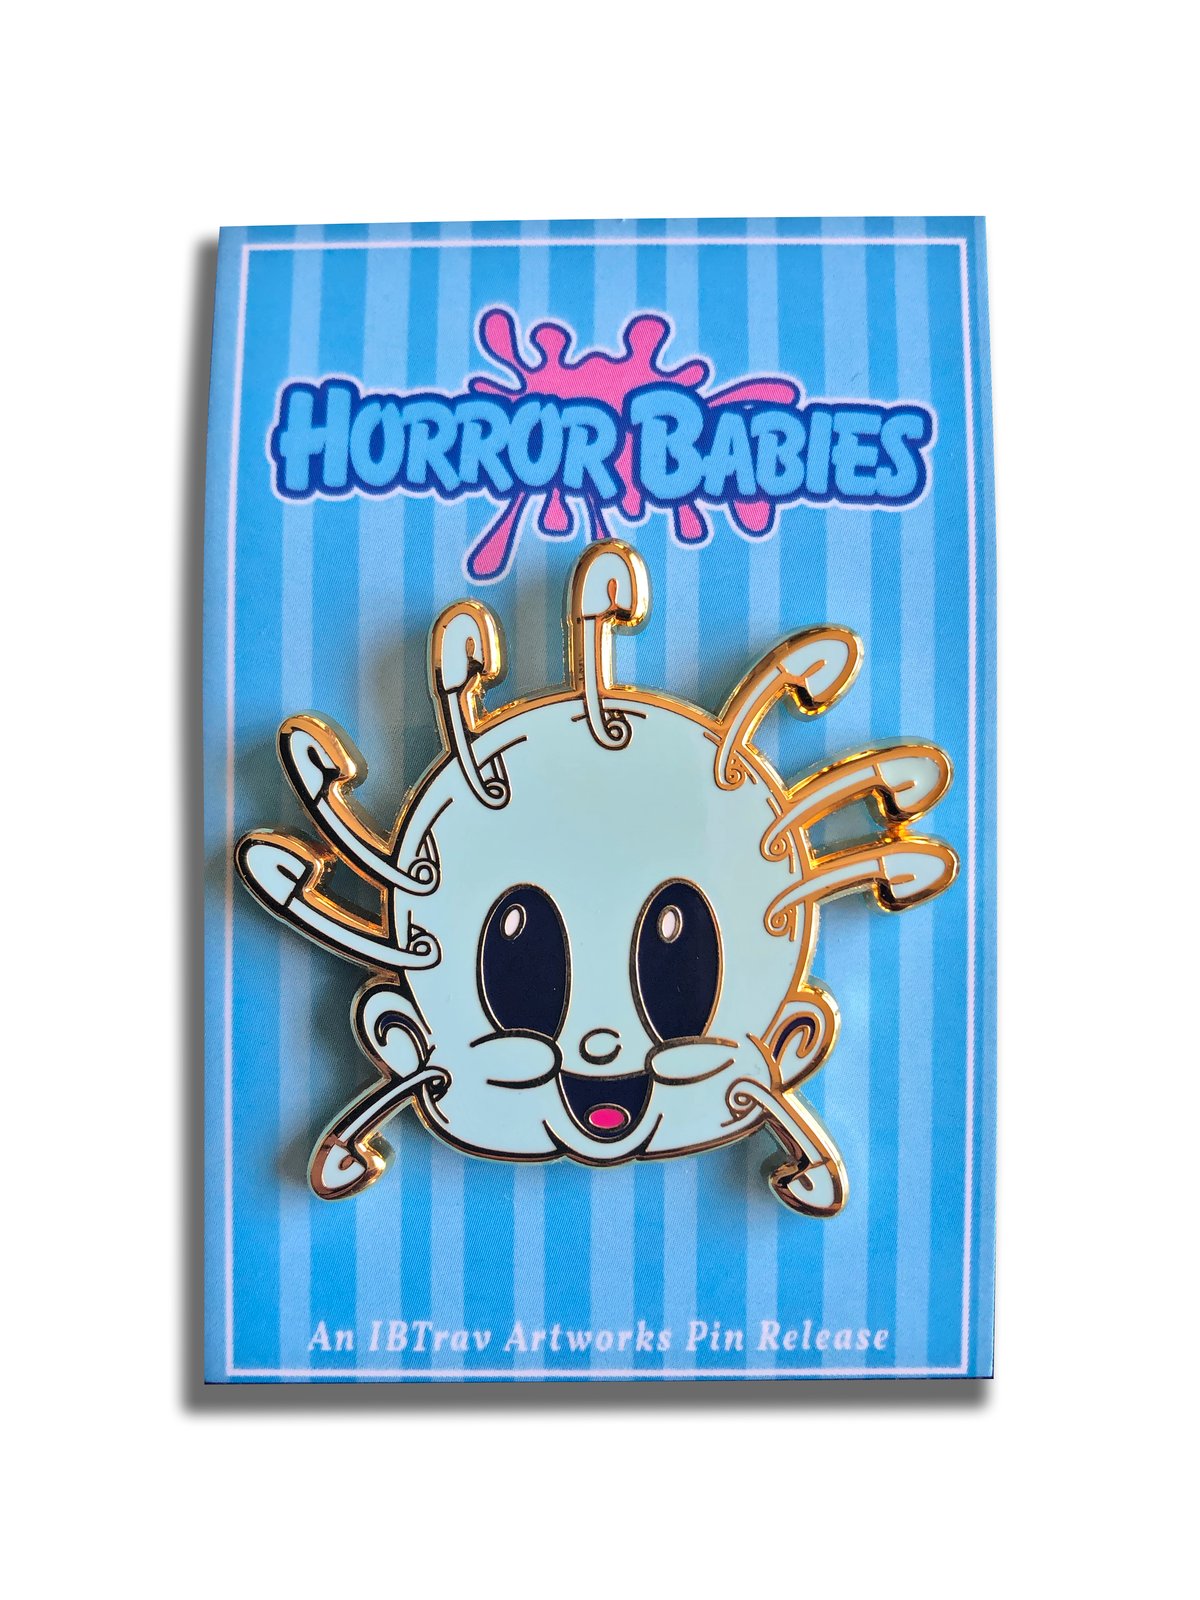 Horror Babies 1.75" "Baby Pin" Limited Edition Enamel Pin